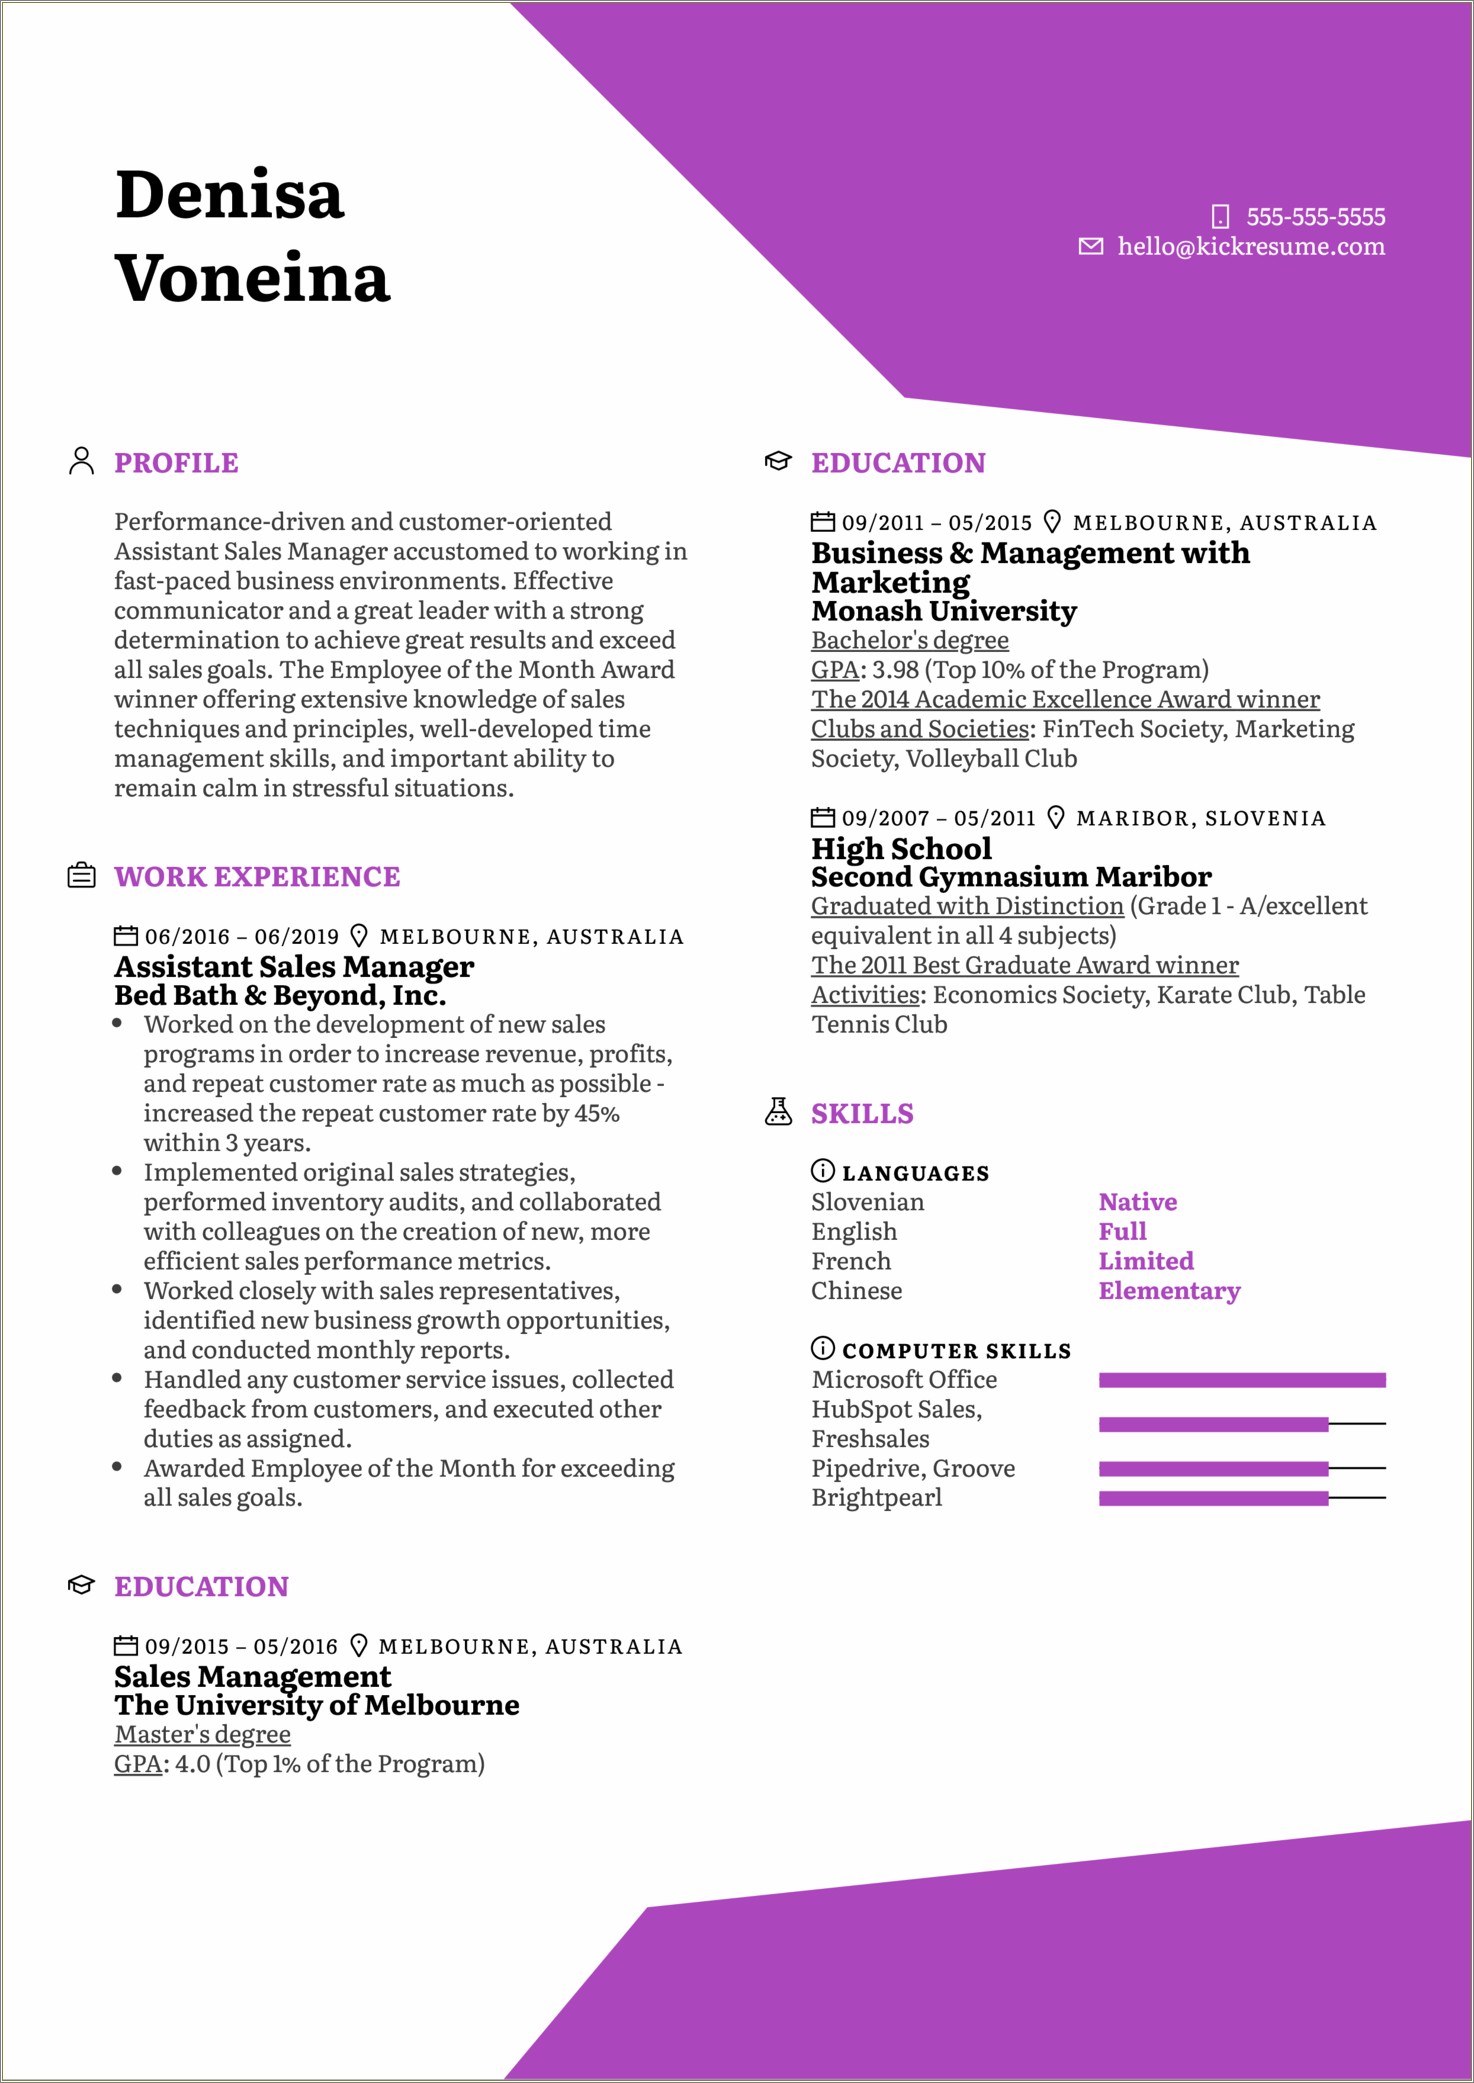 Resume For Sales And Marketing Job